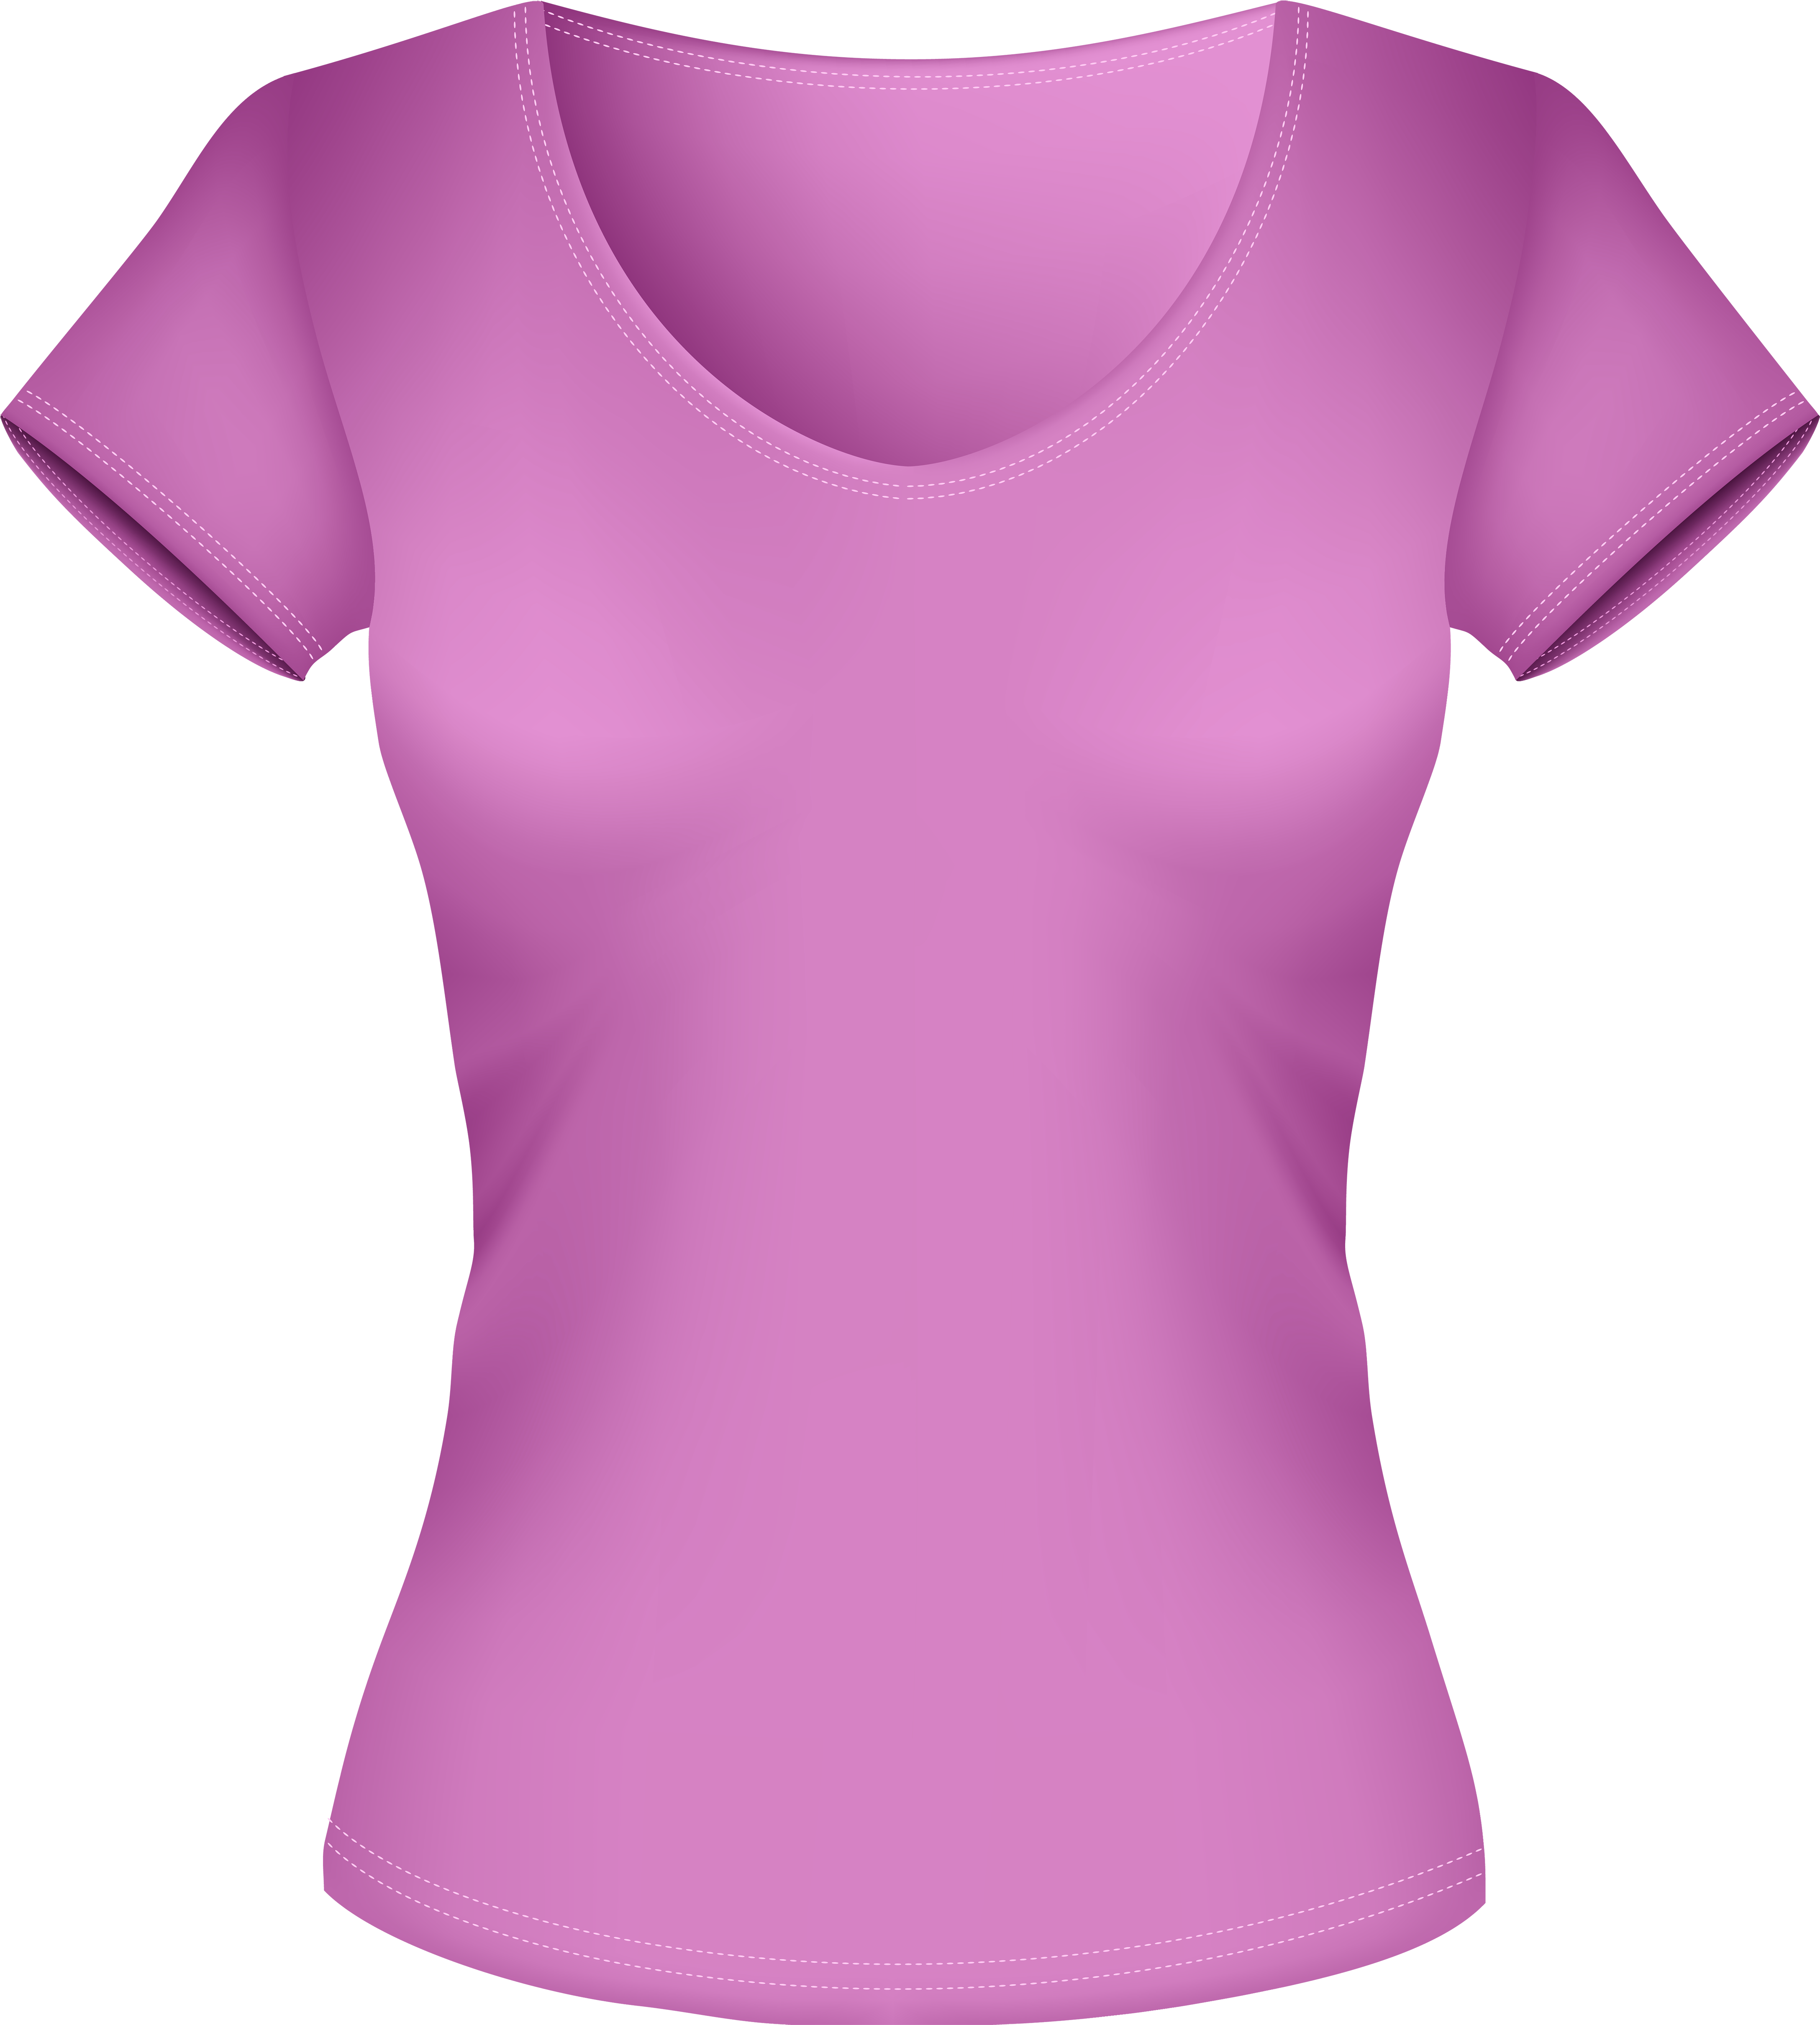 Blouse Png 4350 X 4841